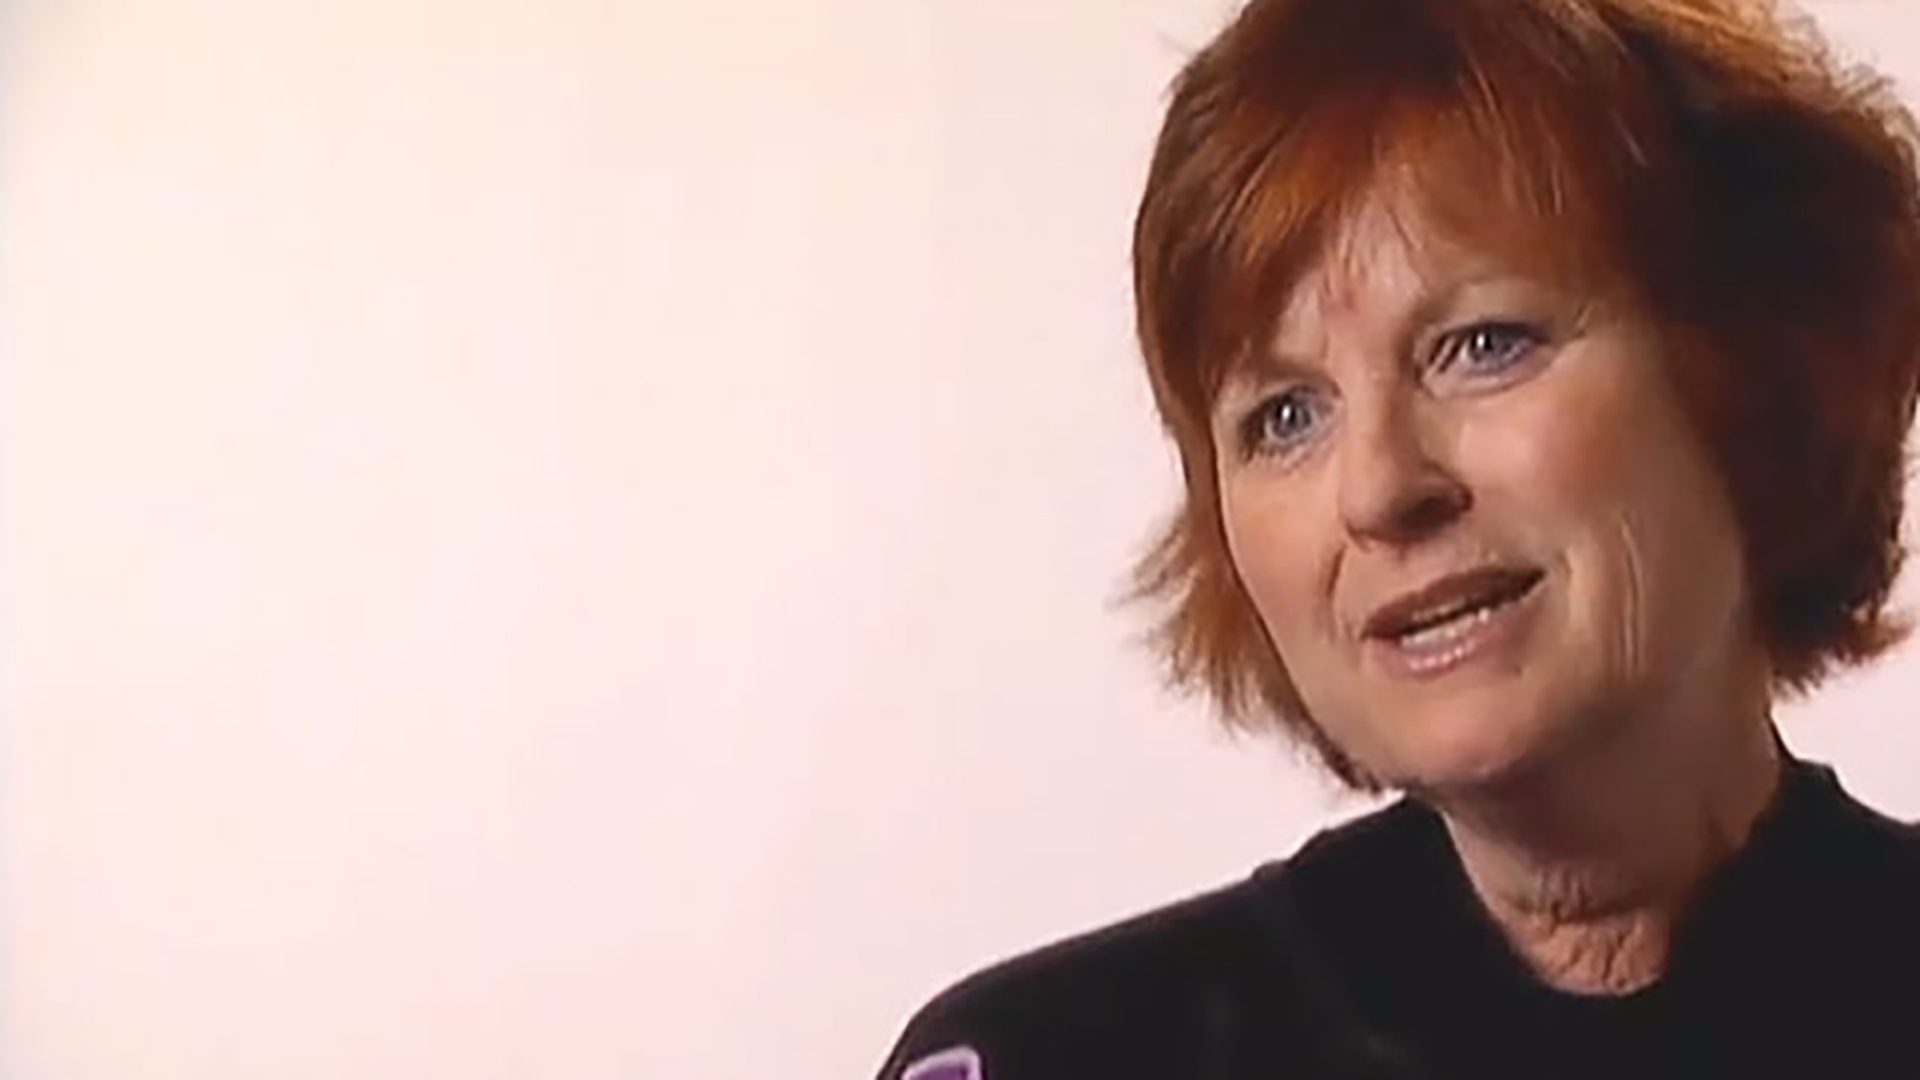 A middle-aged woman with short red hair wearing a black shirt is interviewed against a light background.